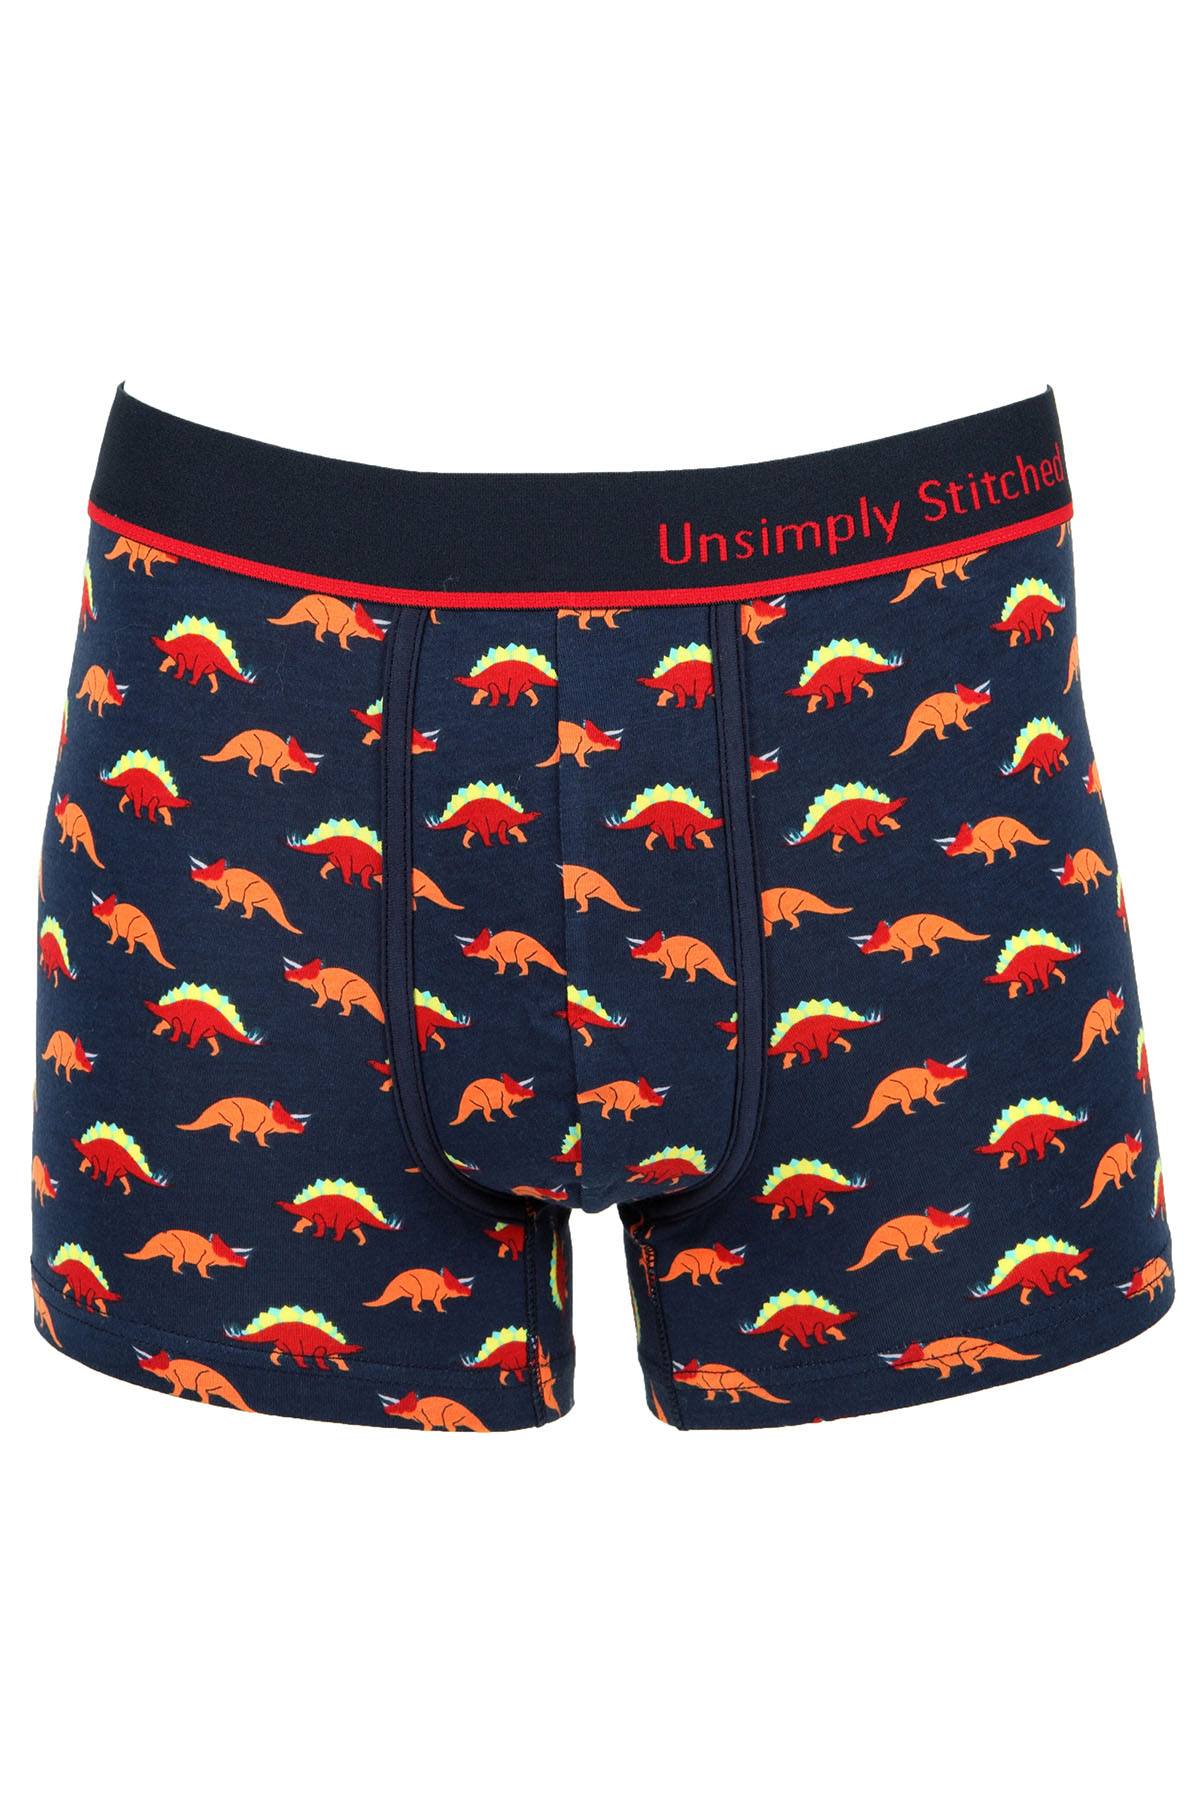 Unsimply Stitched Navy Dinosour Trunk